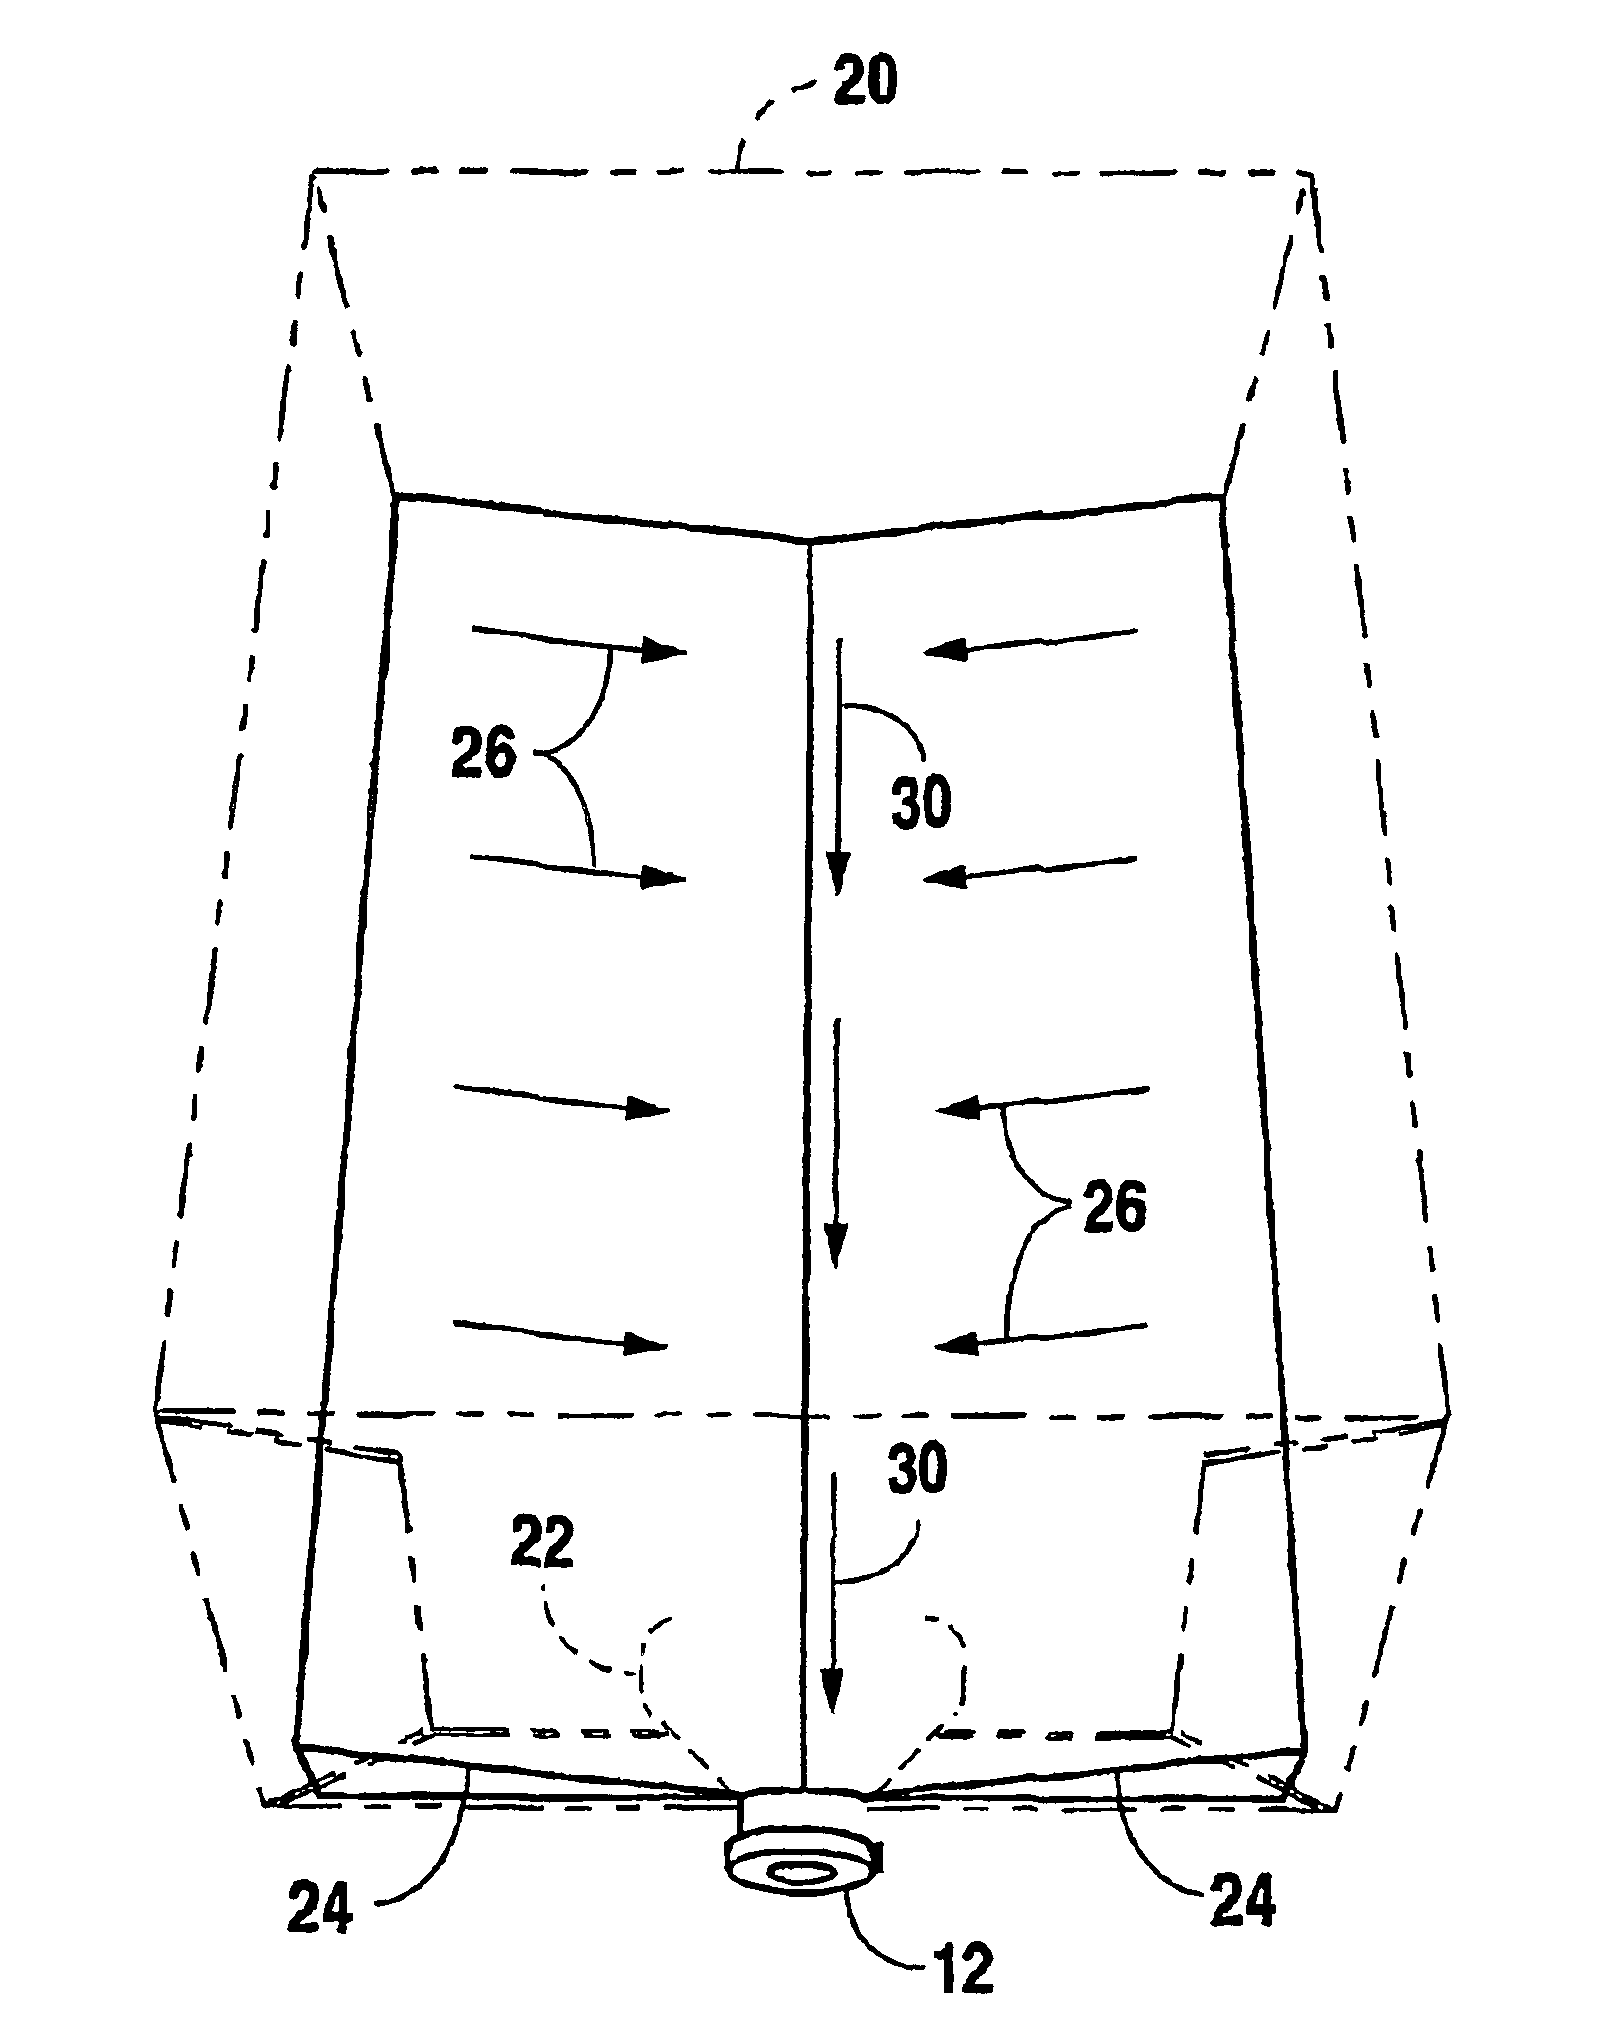 Bag-in-box container for liquids